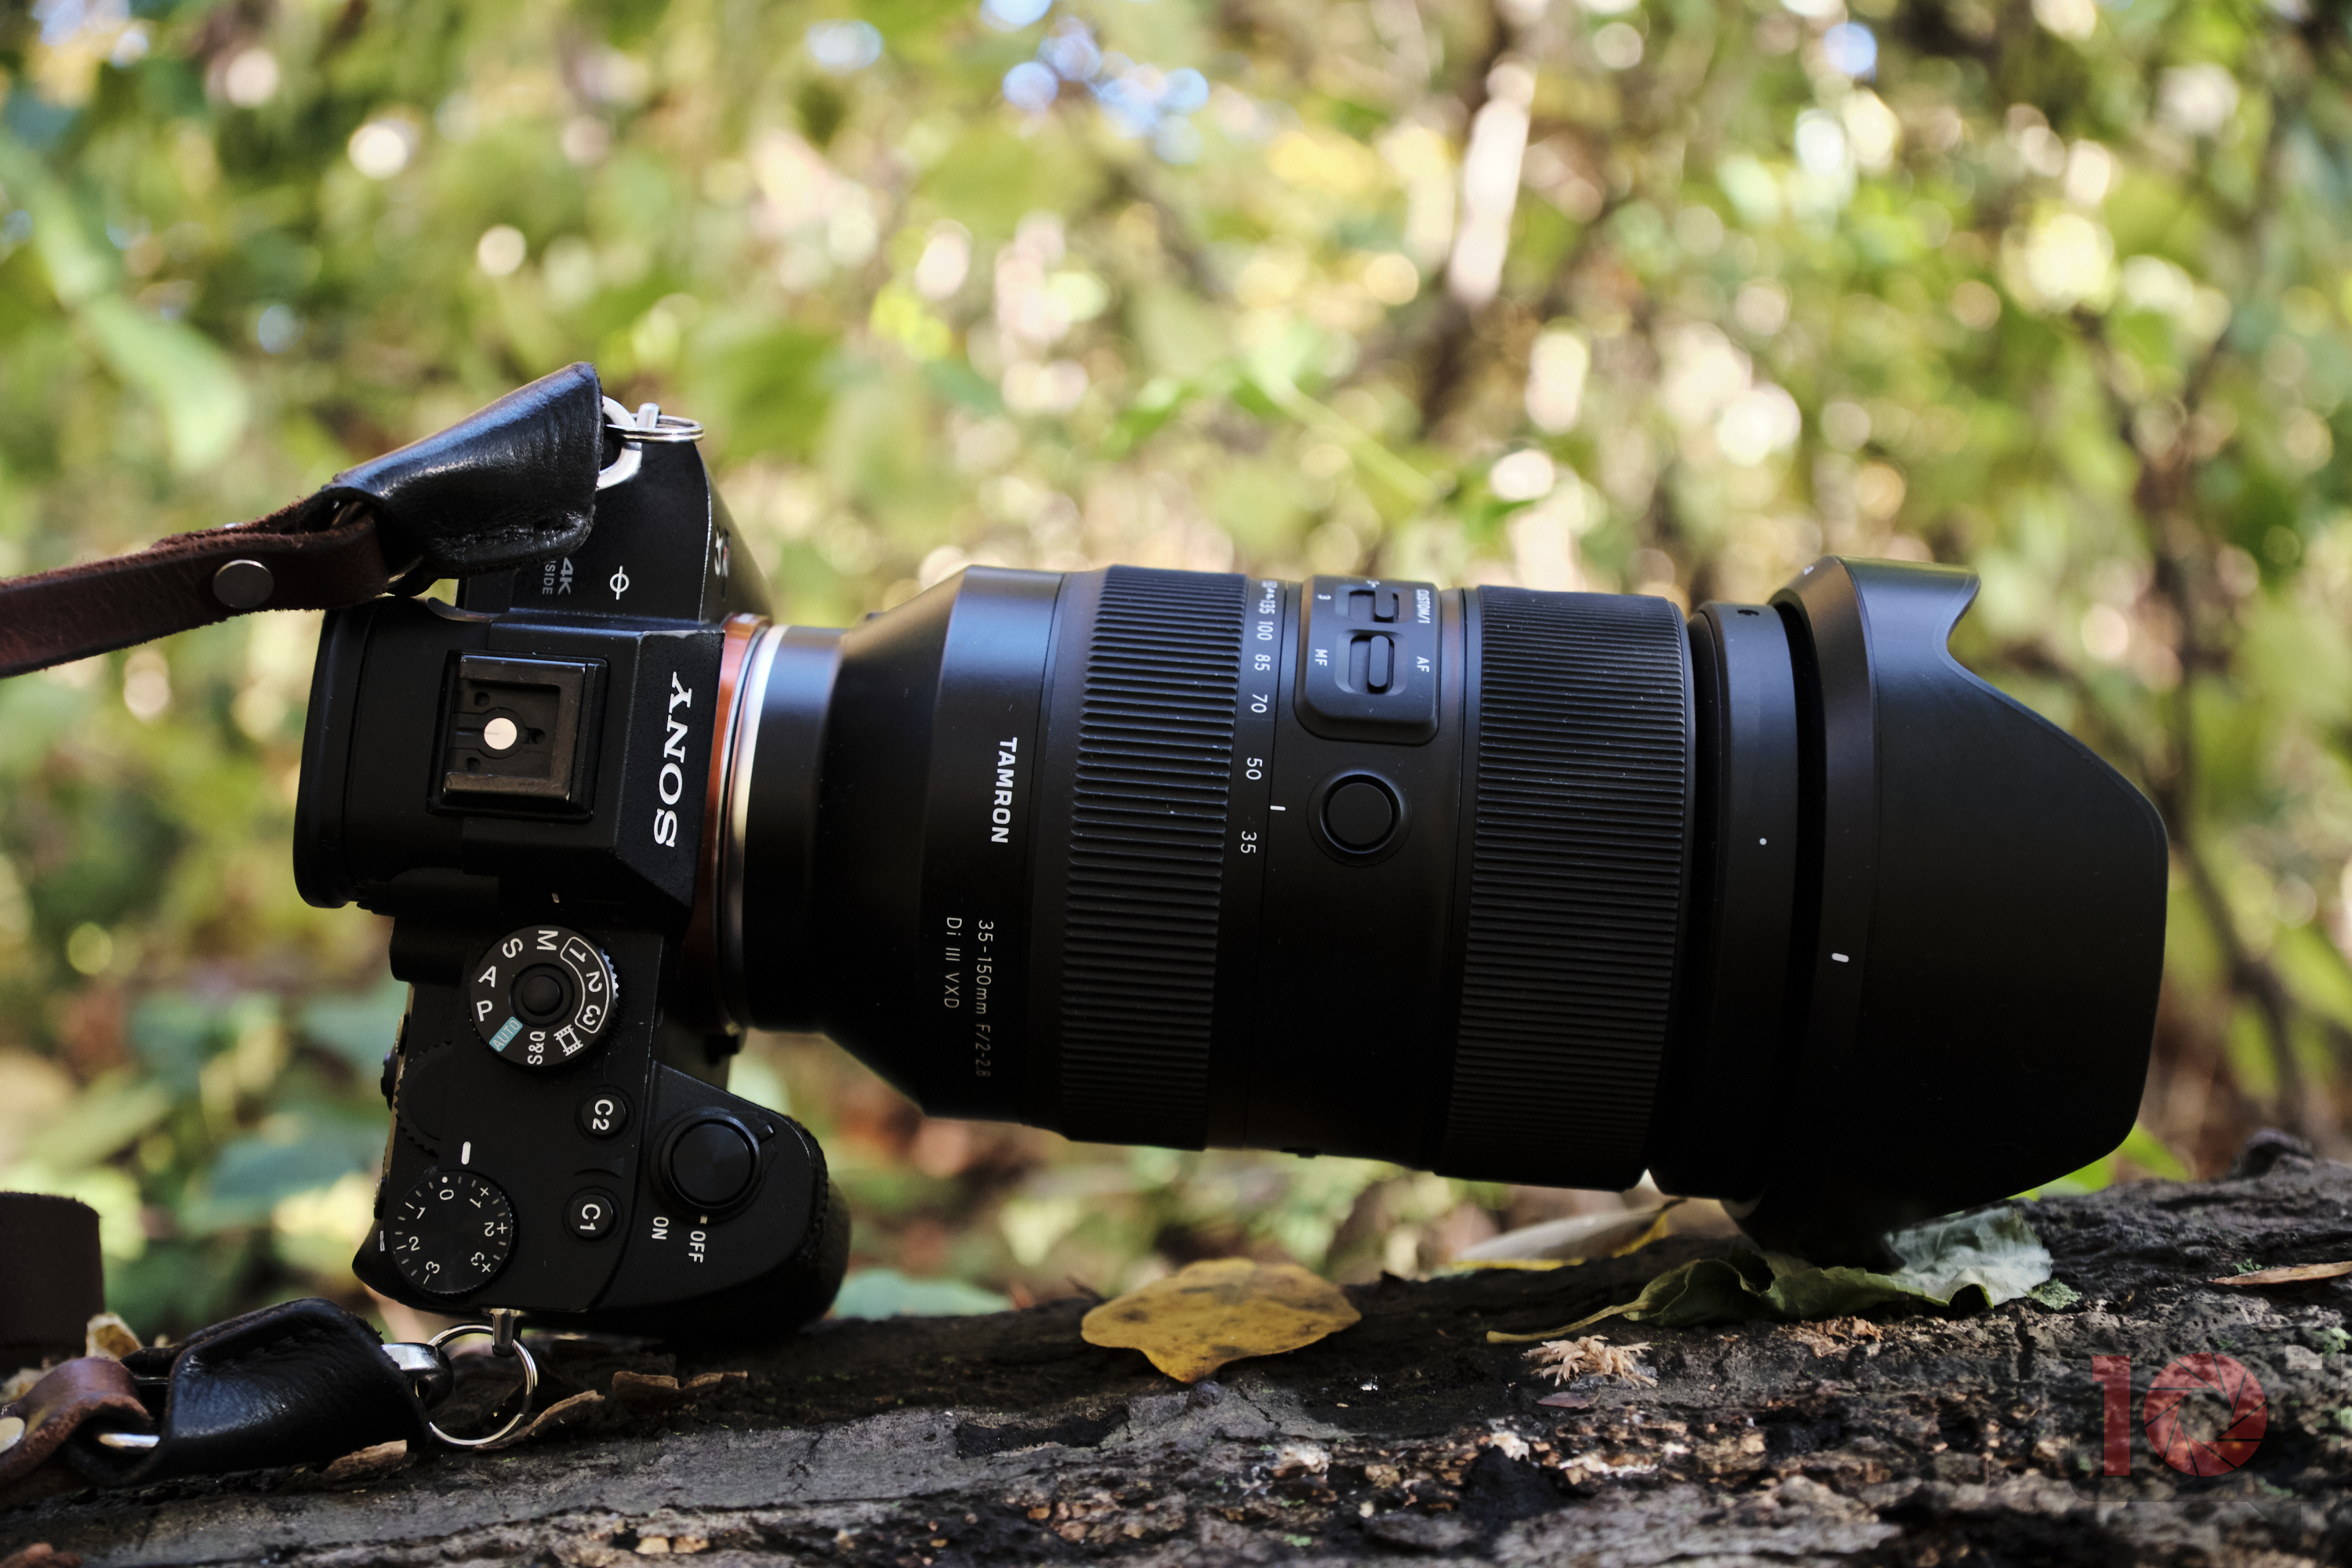 Review: The Tamron 28-75mm f/2.8 for Sony FE is a Home Run